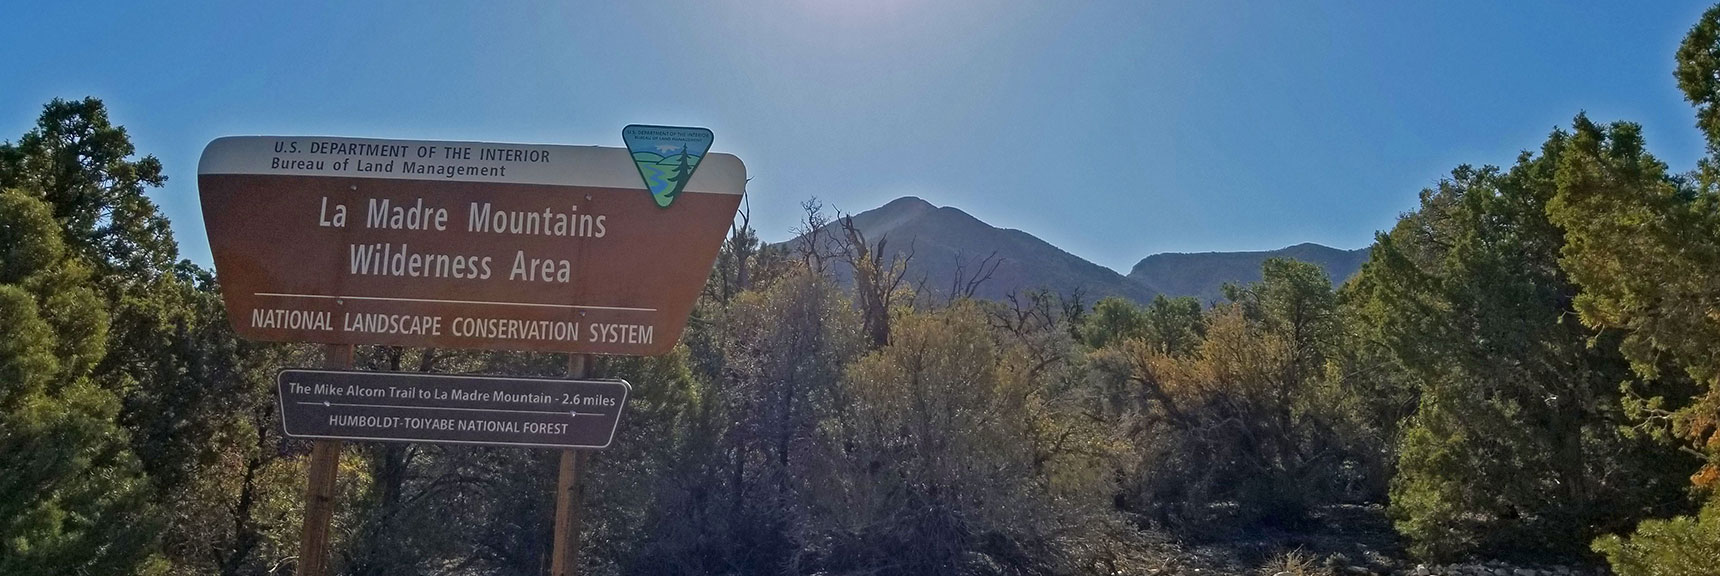 On Foot Now, Entering La Madre Mountains Wilderness Area and Campground | La Madre Mountain,, El Padre Mountain, Burnt Peak | La Madre Mountains Wilderness, Nevada